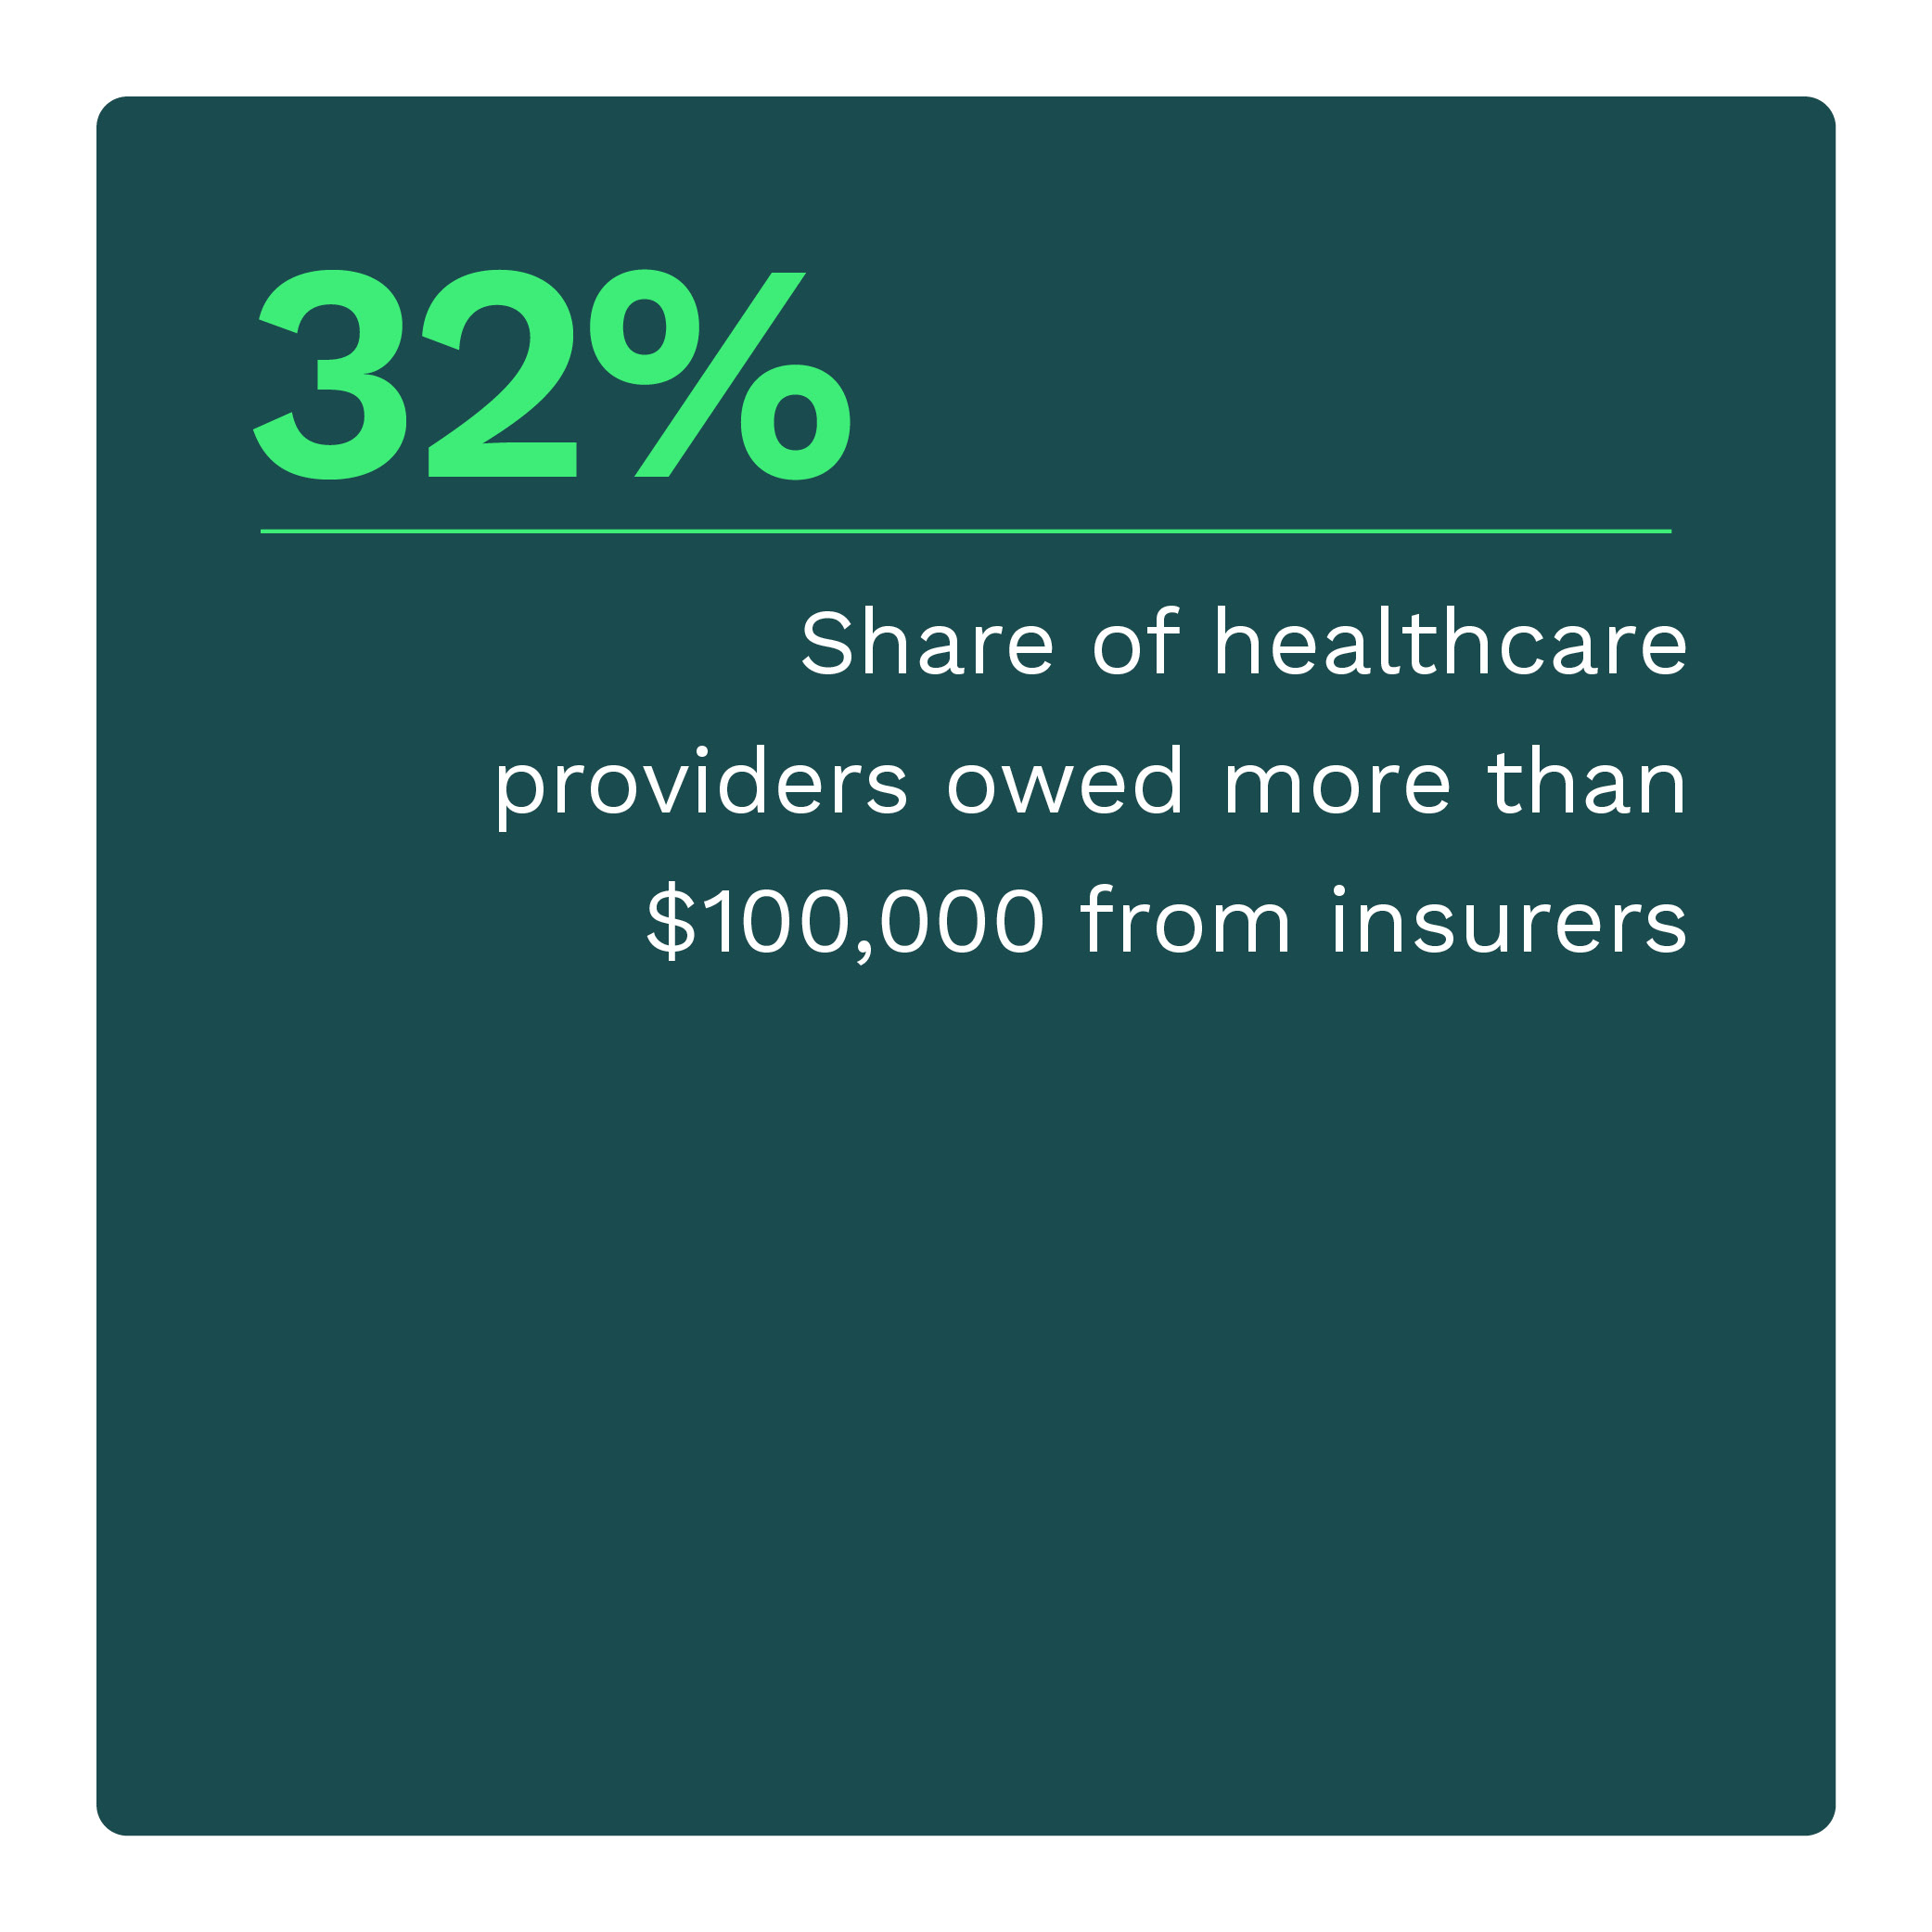 32%: Share of healthcare providers owed more than $100,000 from insurers